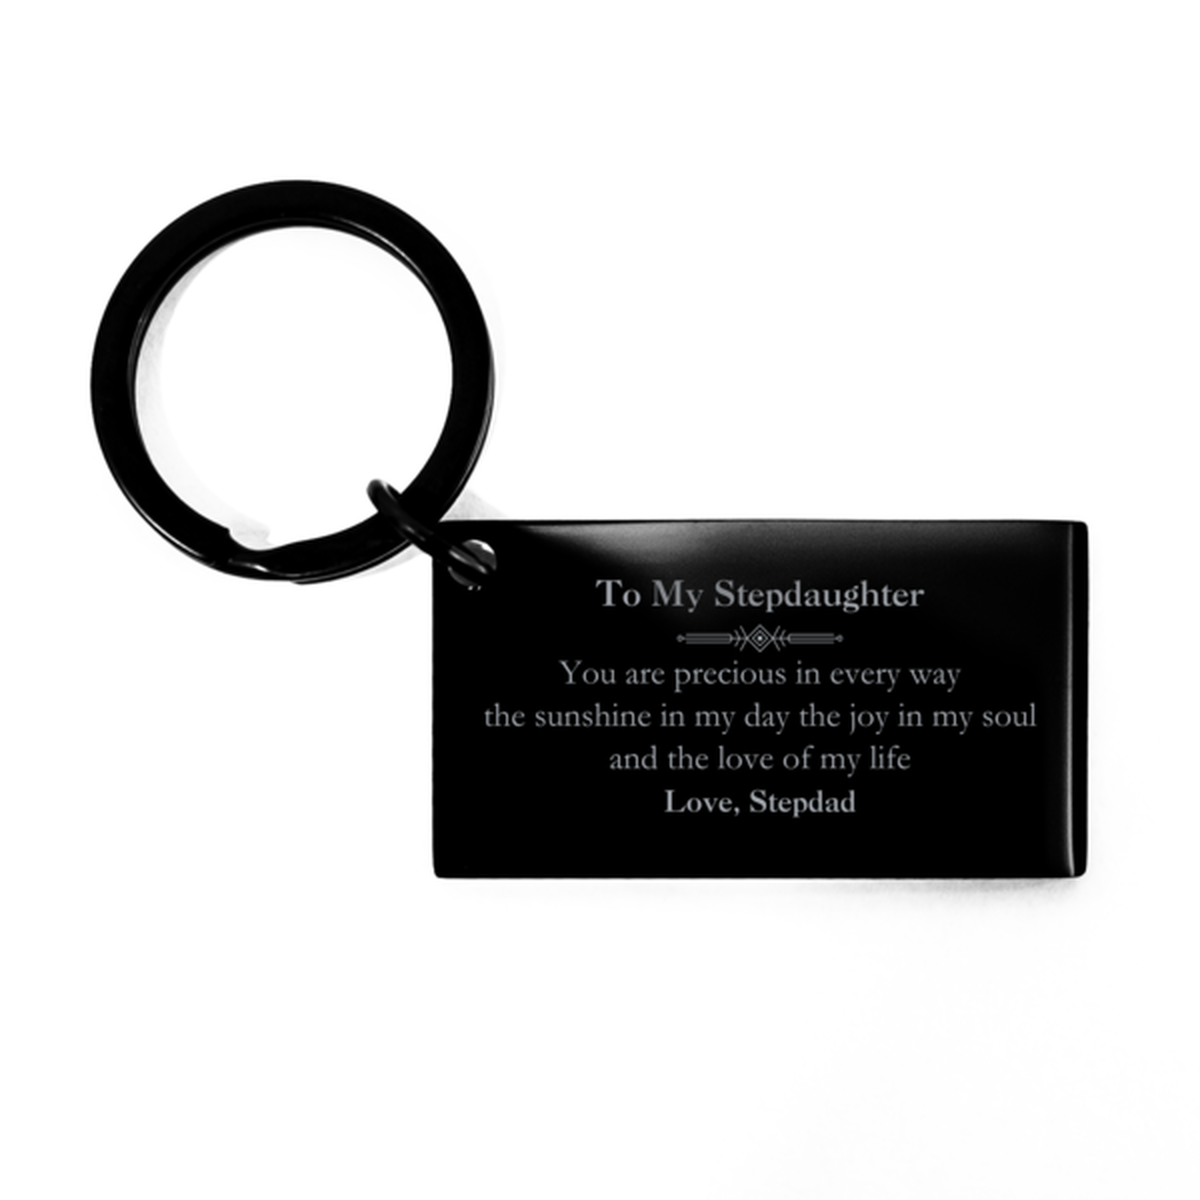 Graduation Gifts for Stepdaughter Keychain Present from Stepdad, Christmas Stepdaughter Birthday Gifts Stepdaughter You are precious in every way the sunshine in my day. Love, Stepdad